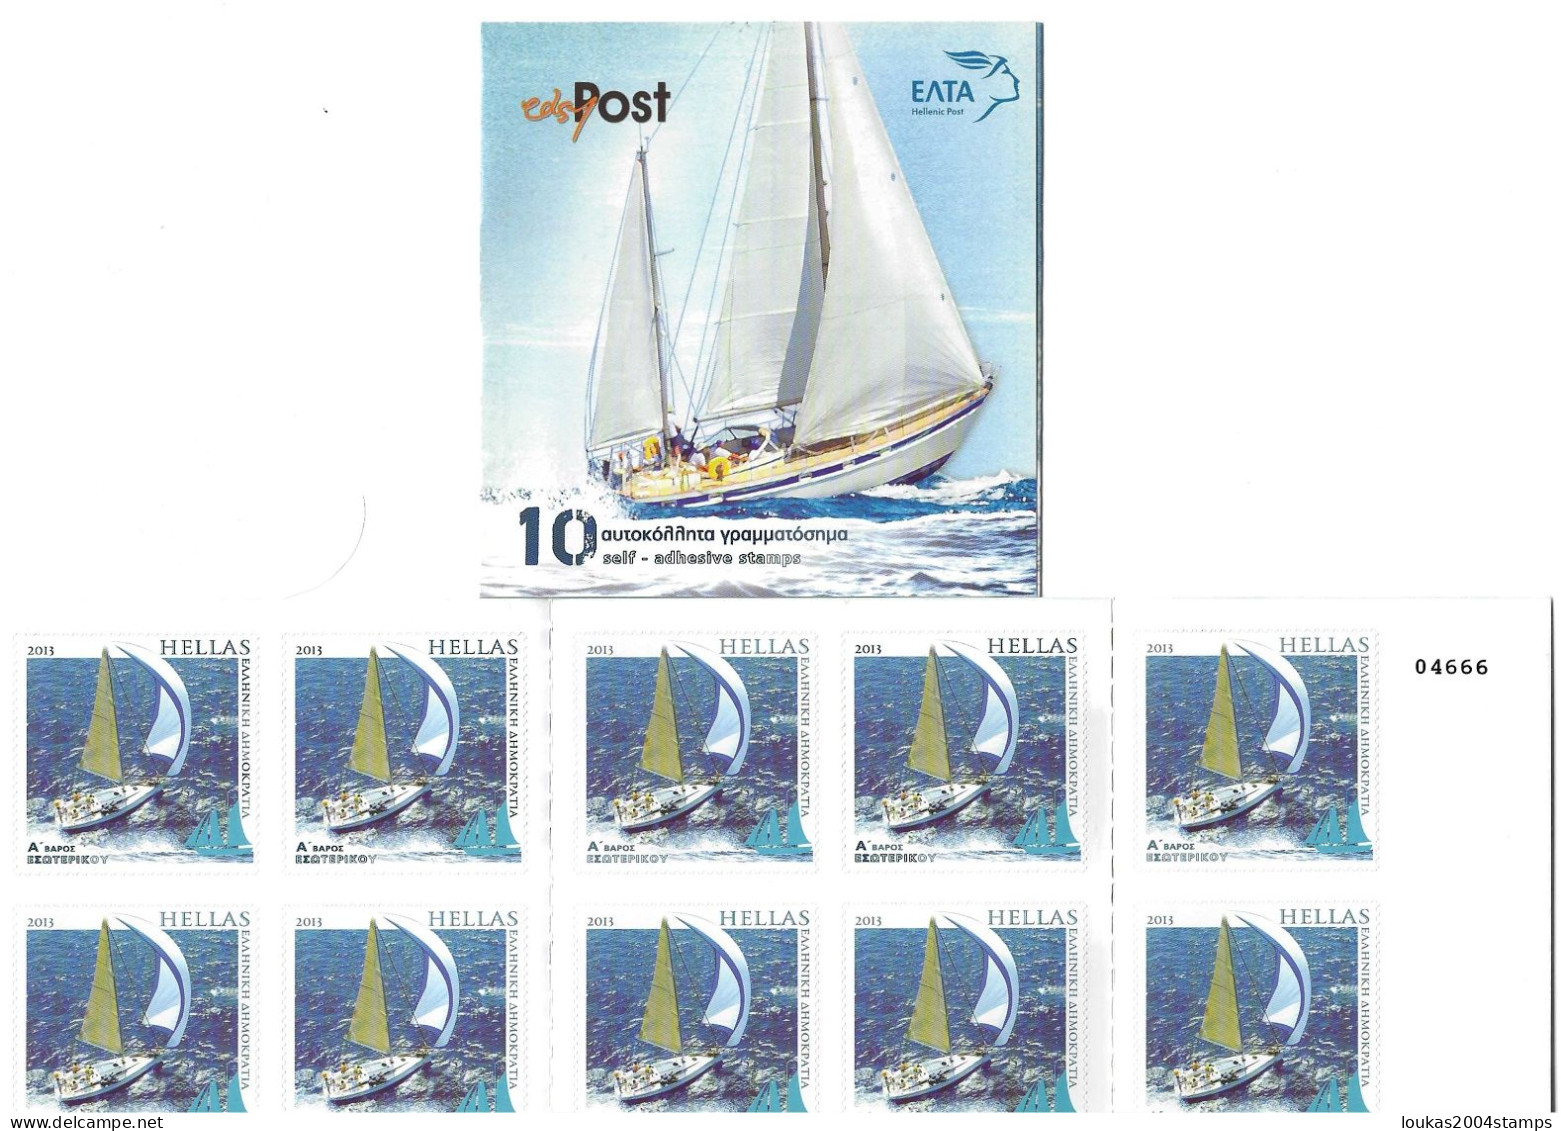 GREECE  2013    BOOKLET    SELF - ADHESIVE   STAMPS    SAILING  TOURISM   [  WITH  NUMBER  ] - Markenheftchen